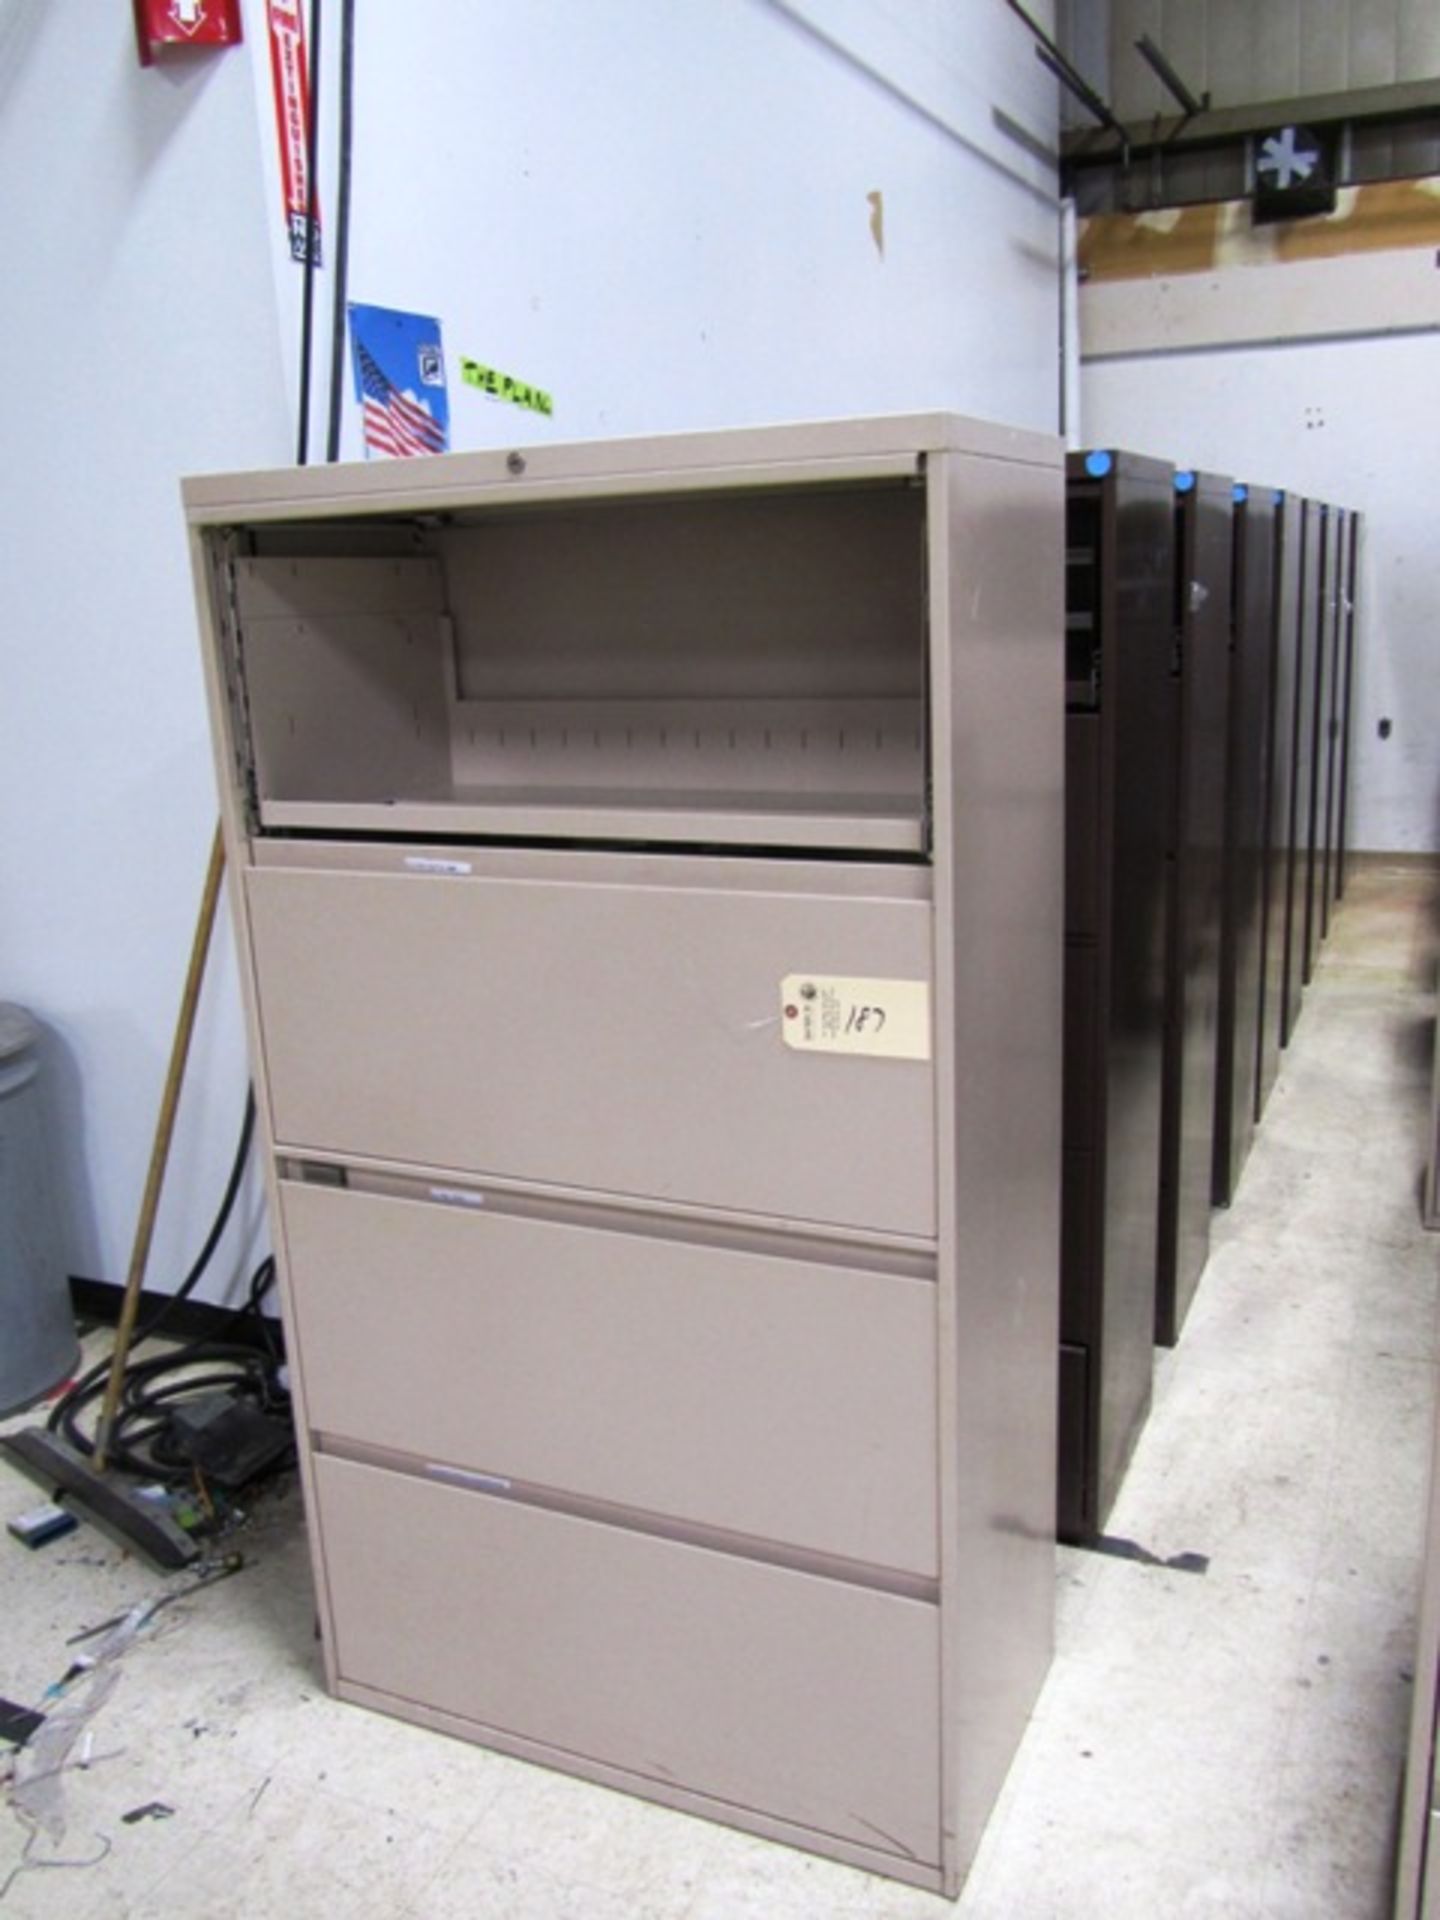 (9) Lateral Filing Cabinets